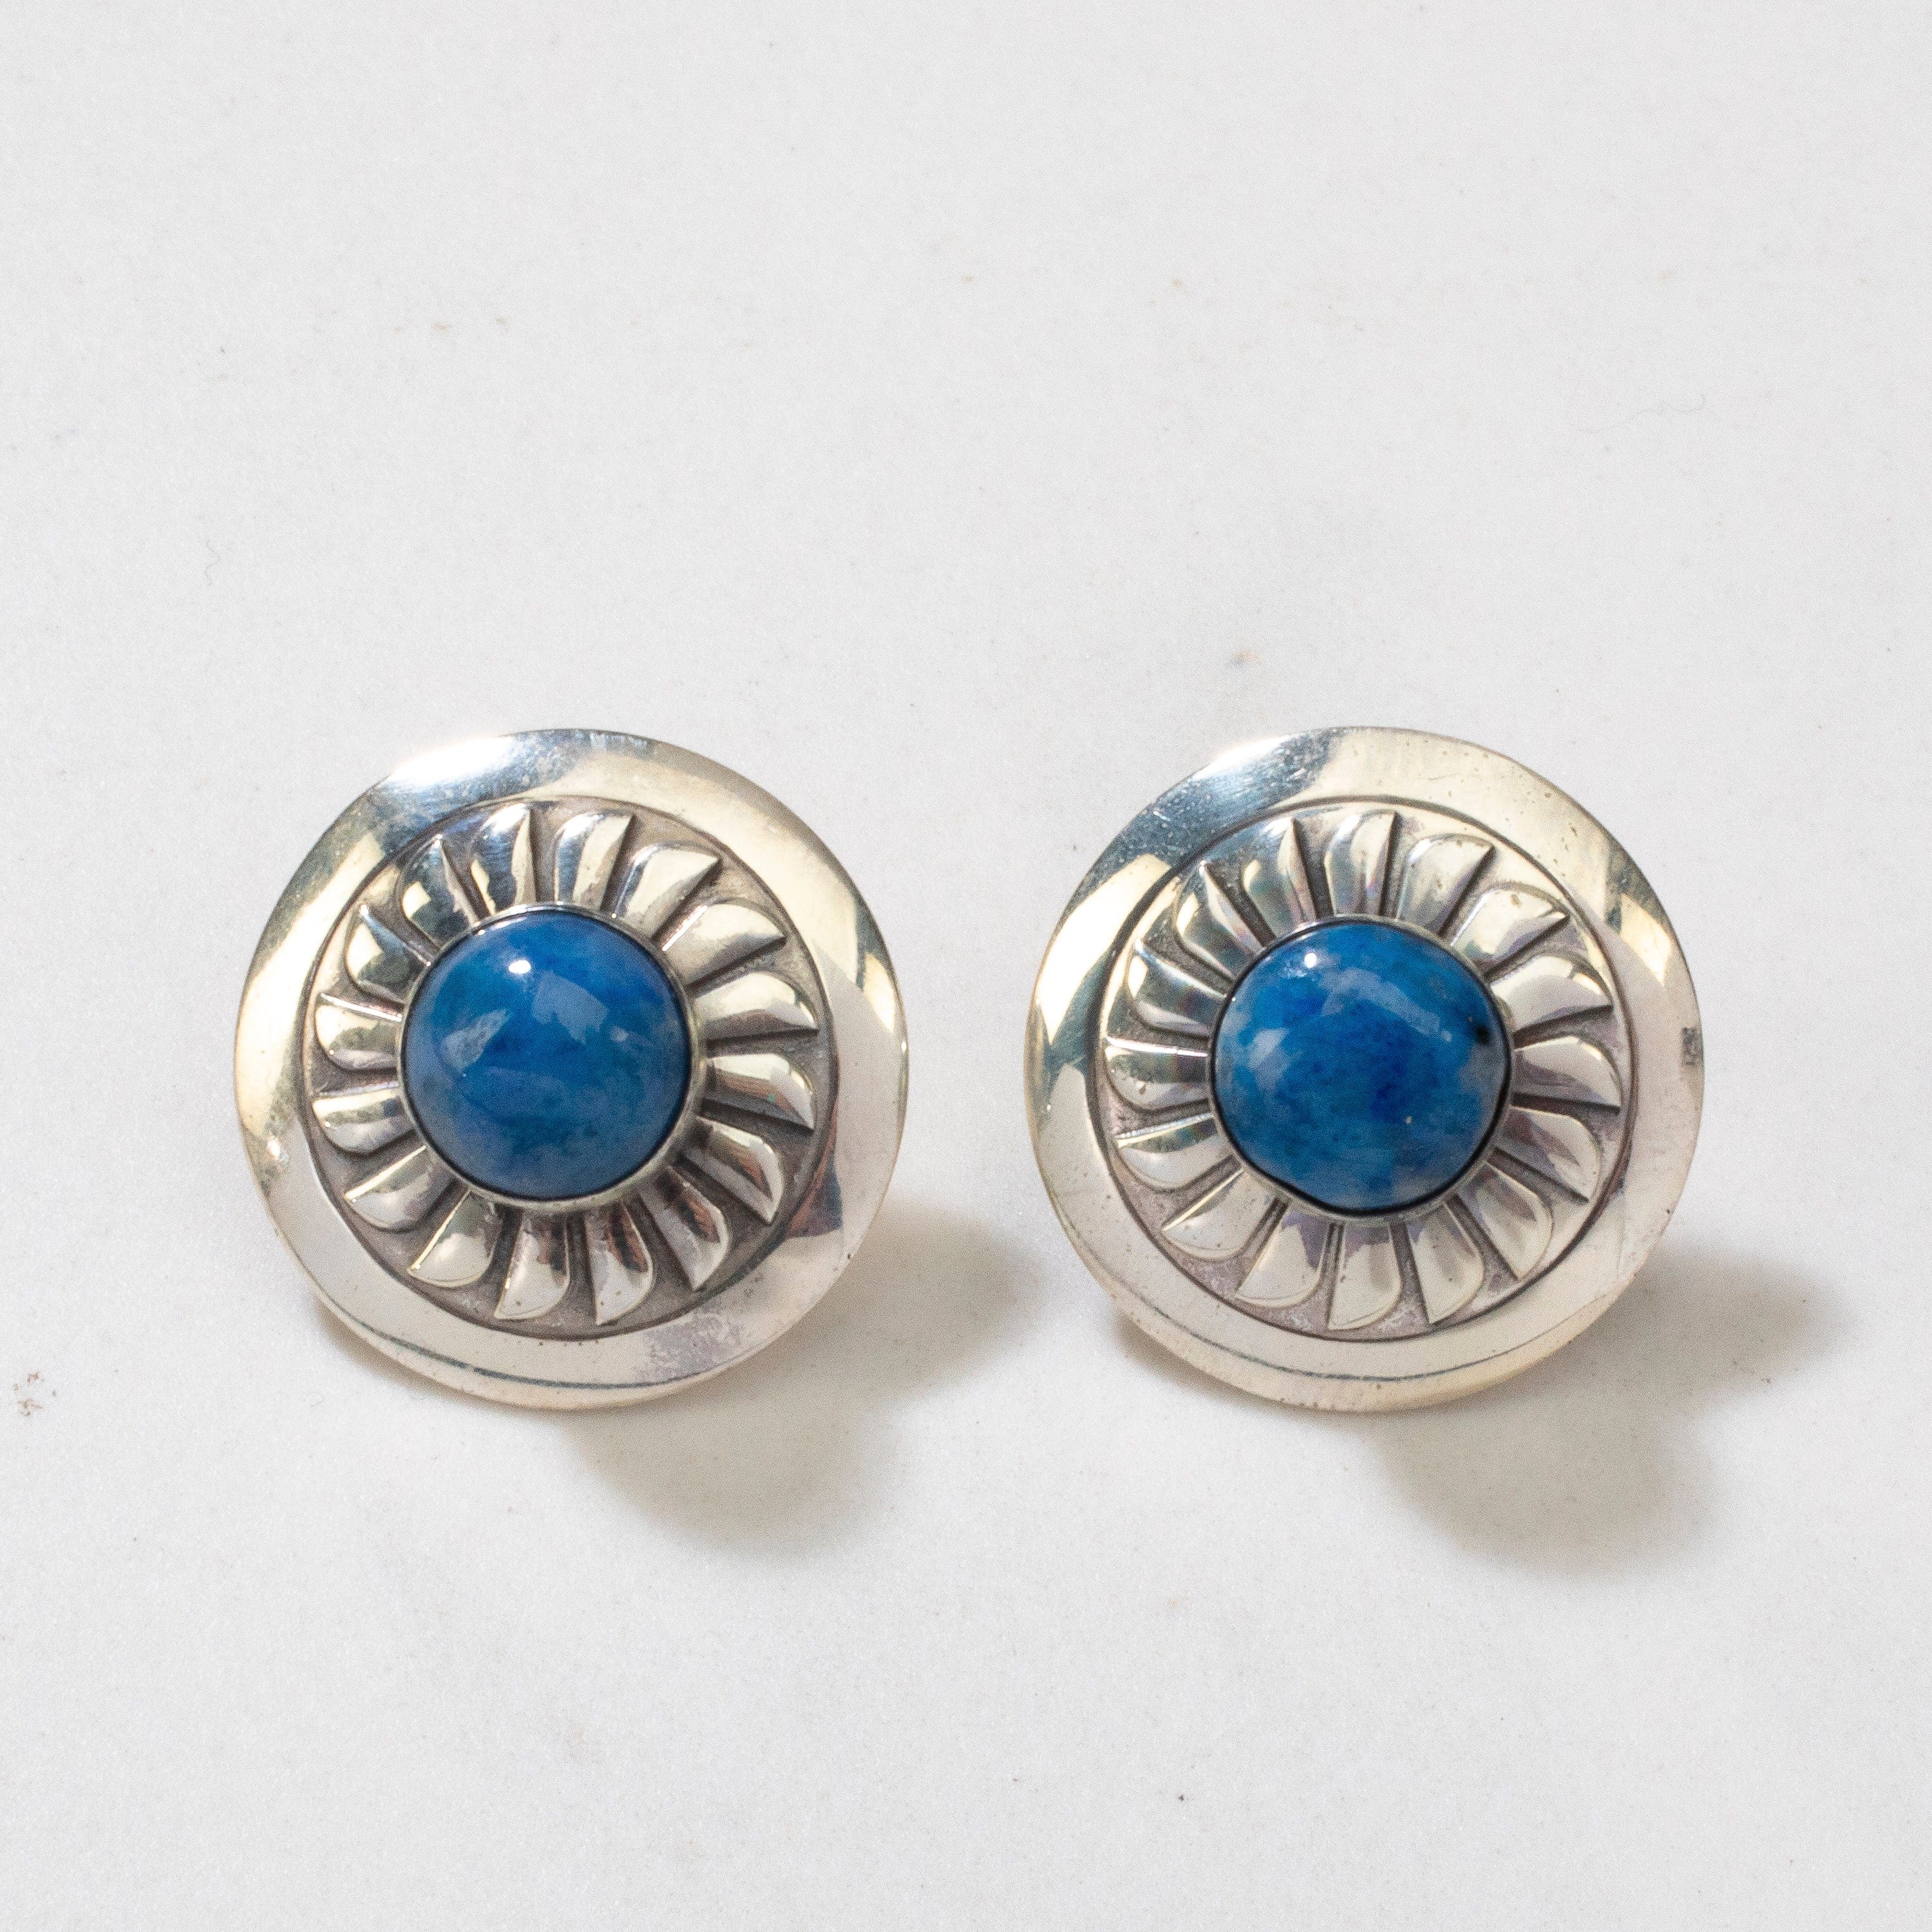 Kalifano Native American Jewelry Denim Lapis Sun Navajo USA Native American Made 925 Sterling Silver Earrings with Stud Backing NAE200.020